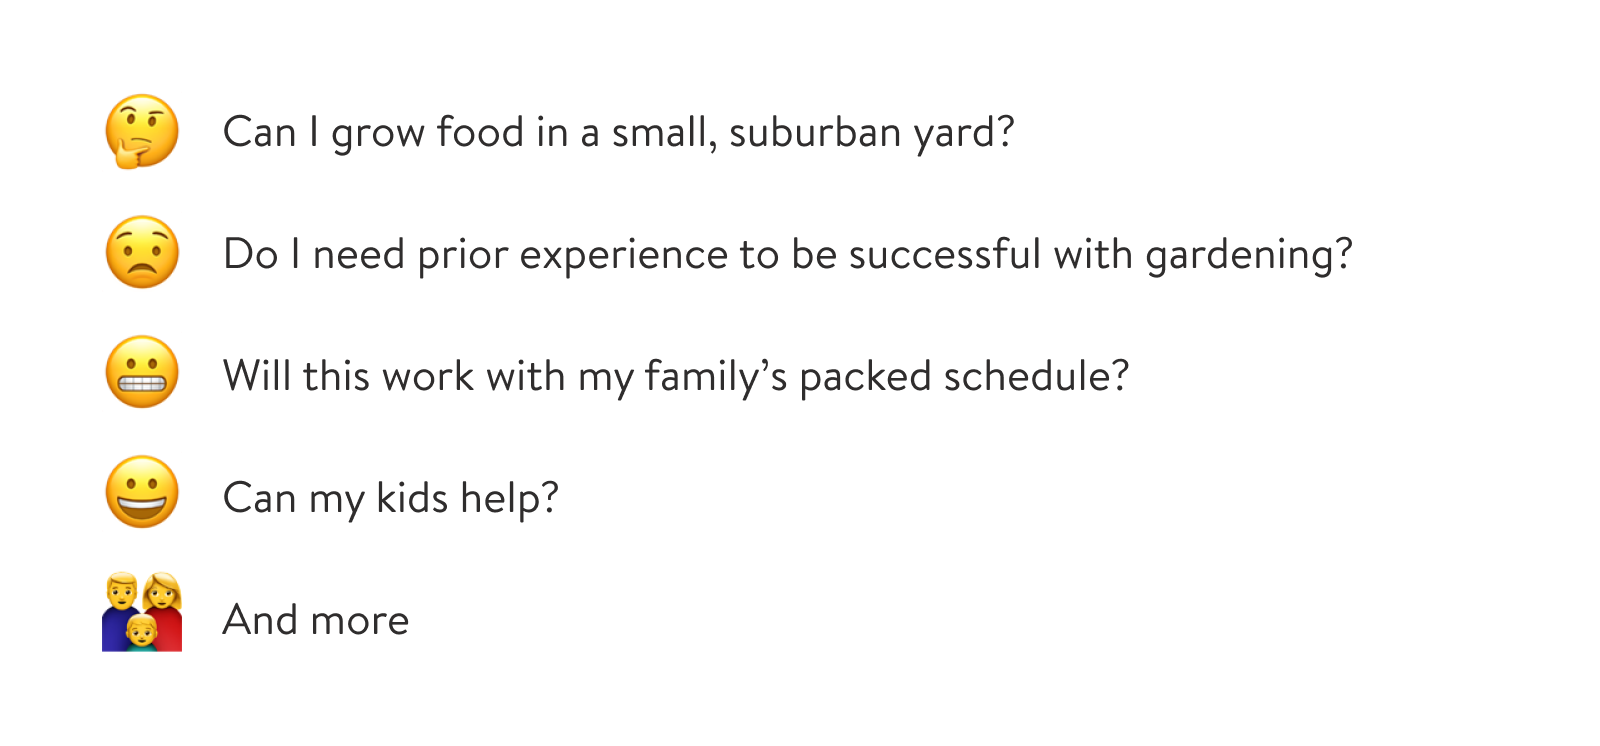 (1) Can I grow food in a small, suburban yard? (2) Do I need prior experience to be successful with gardening? (3) Will this work with my family's packed schedule? (4) Can my kids help?